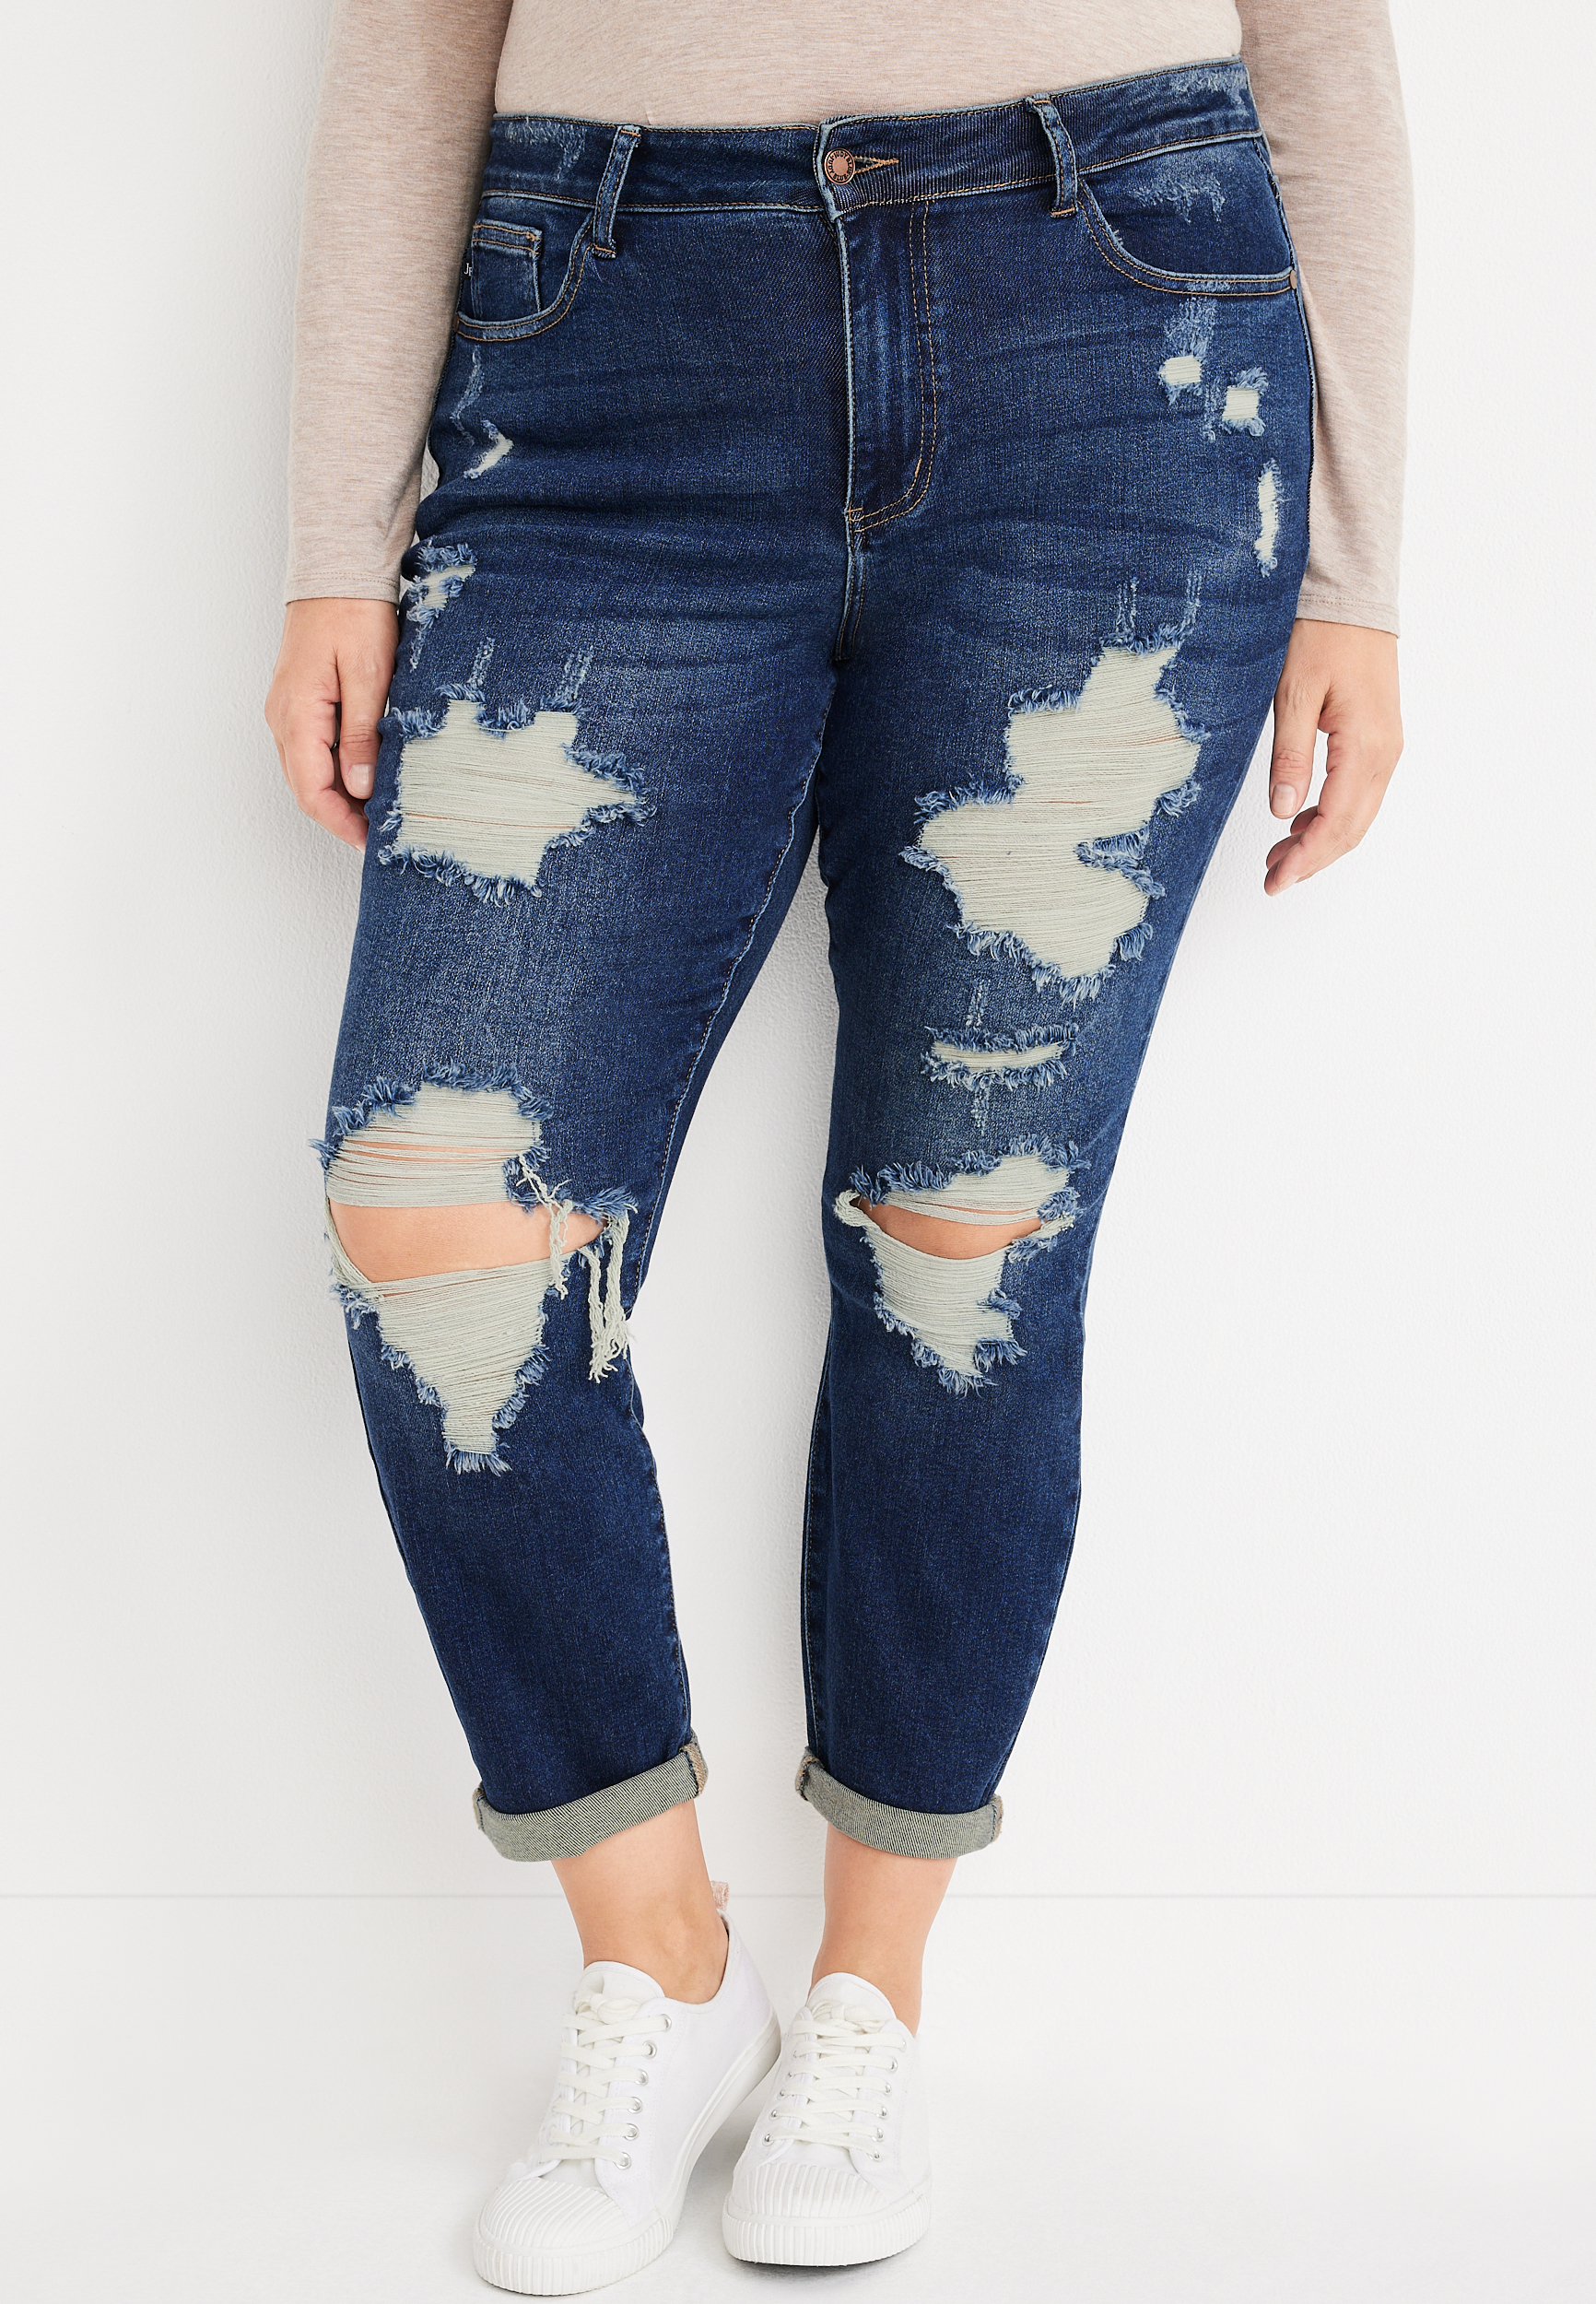 Plus Size Judy Blue® High Rise Ripped Boyfriend Jean | maurices